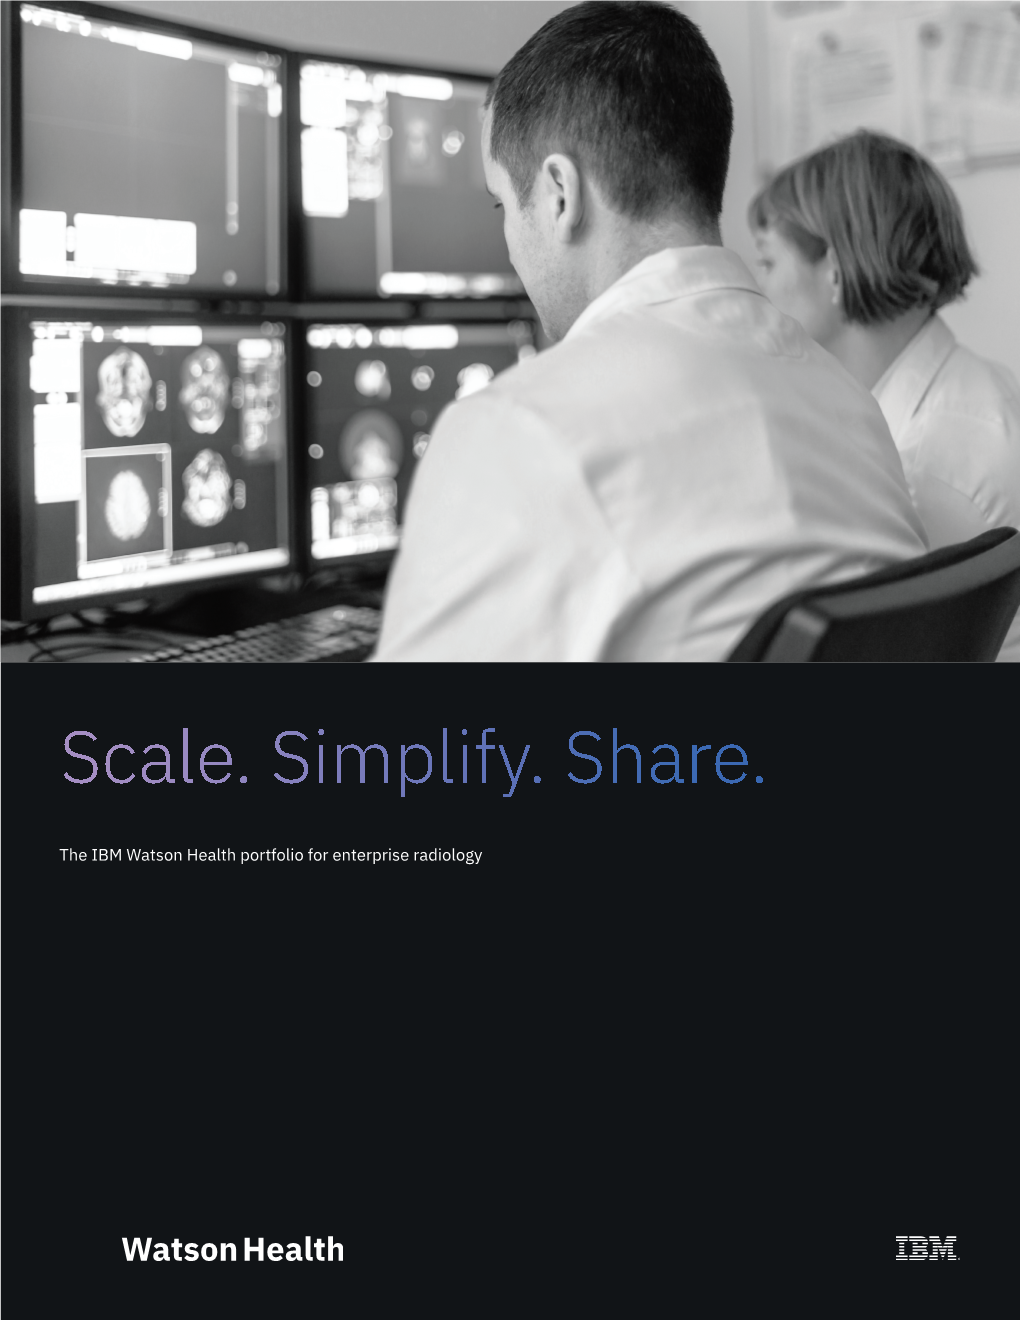 Scale. Simplify. Share